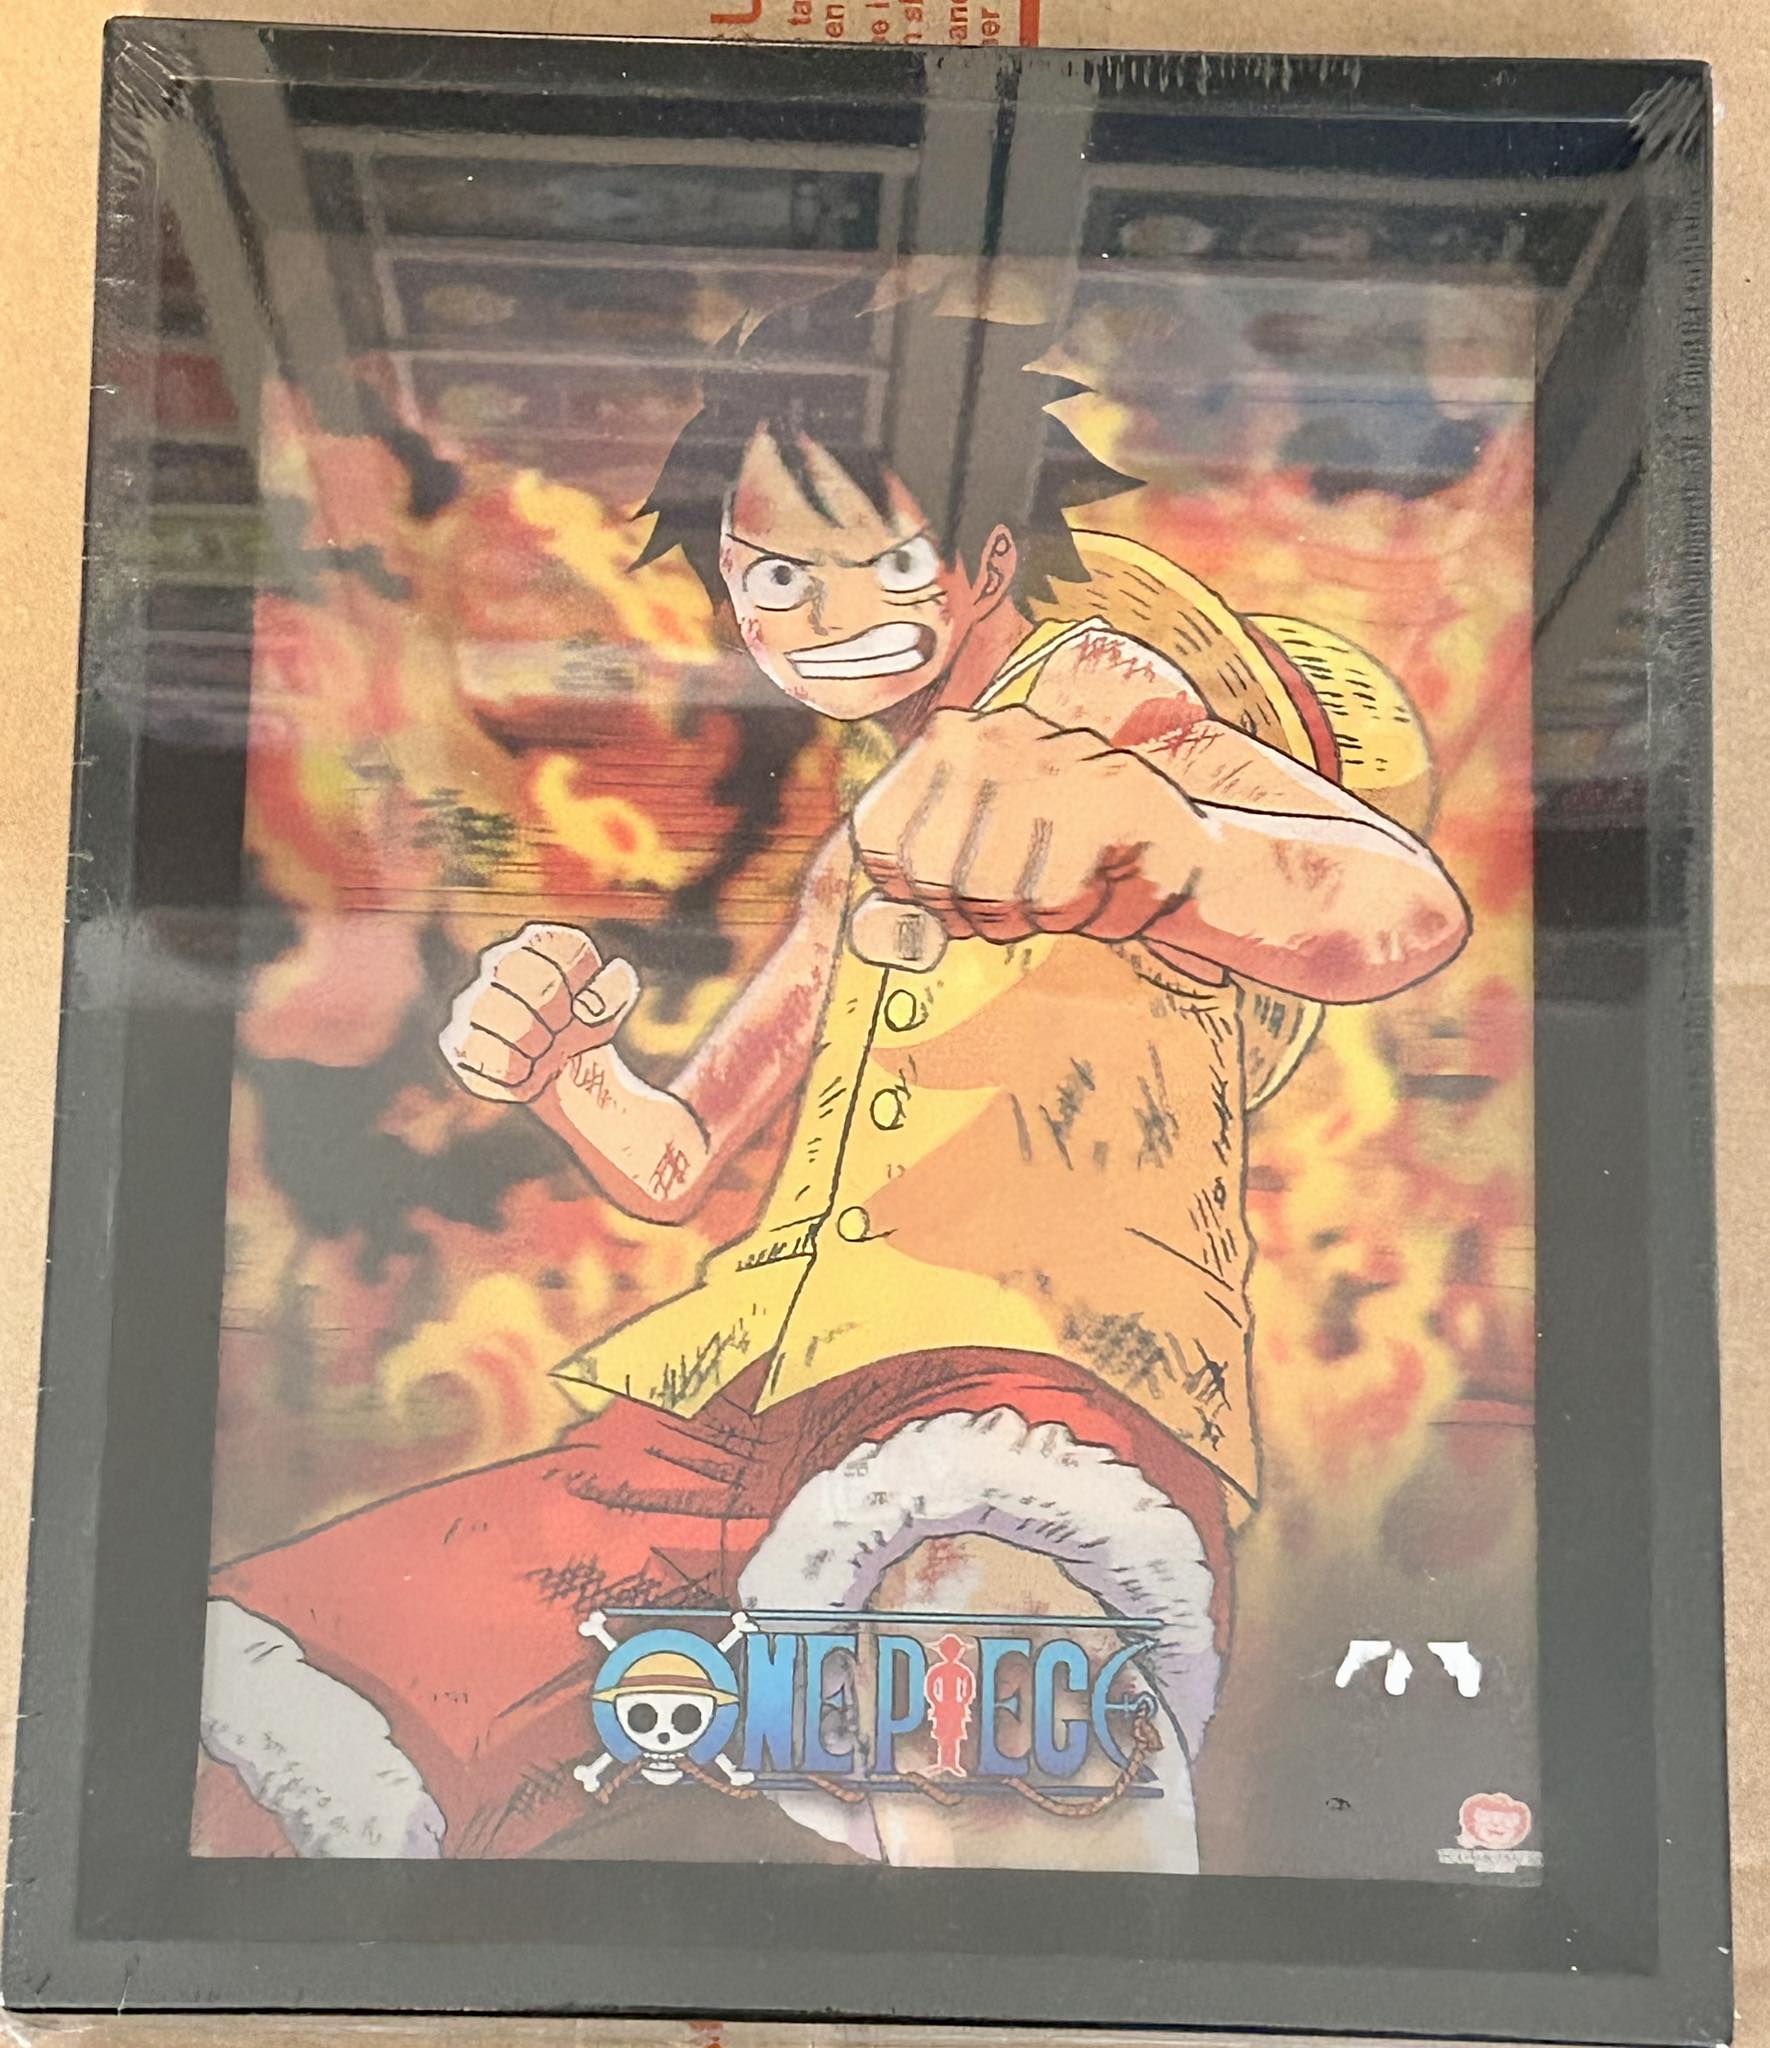 Cadre 3D lenticulaire - One Piece - Brothers burning rage - Objets